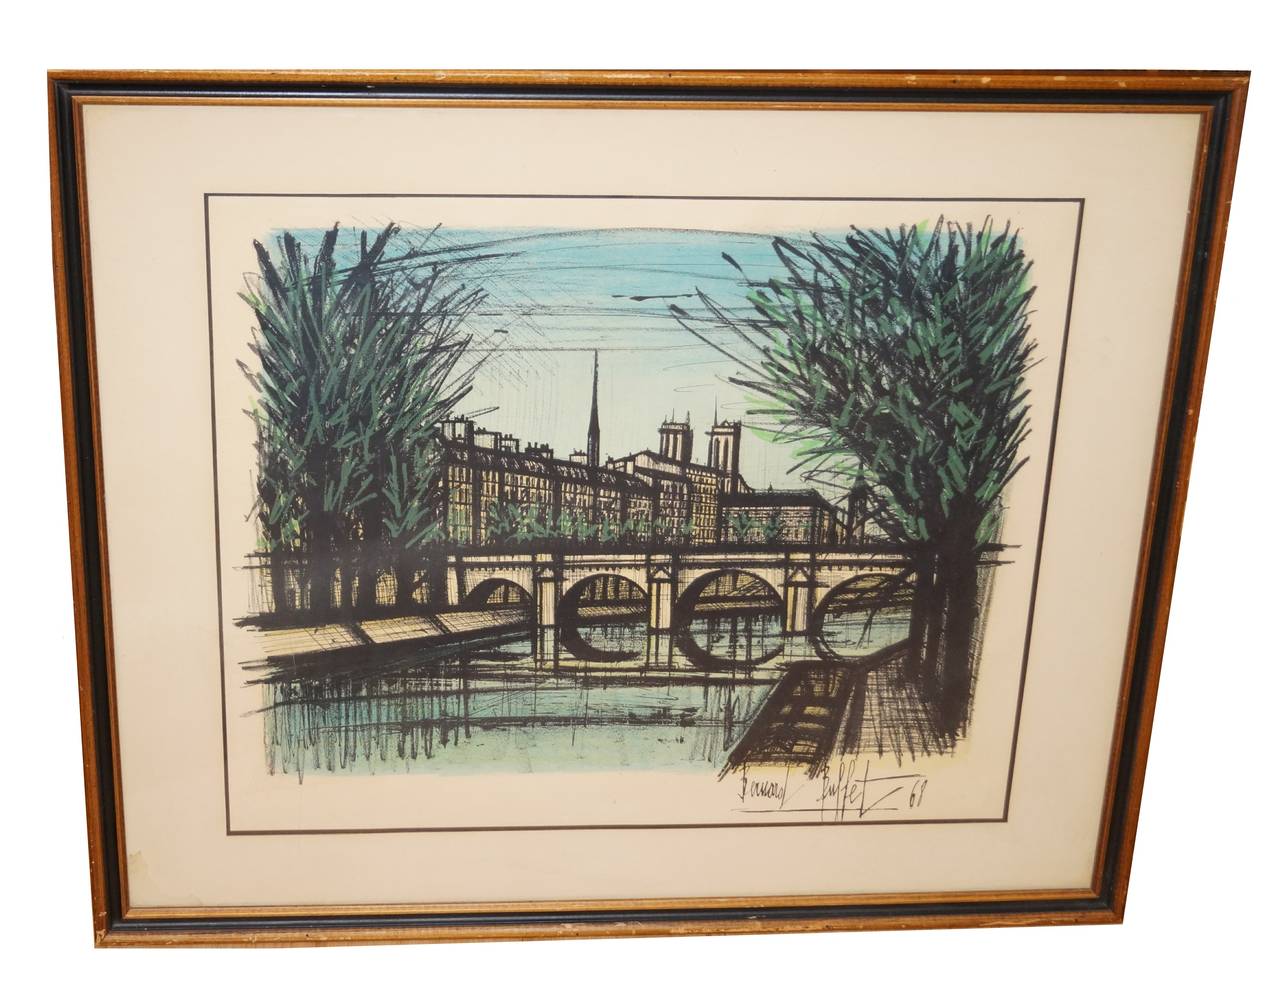 Original Bernard Buffet lithograph from the unnumbered edition of unknown size for the Collector's Guild LTD, with printed signature; original documentation included.  There was also a separate edition of 125, signed and numbered in pencil. 